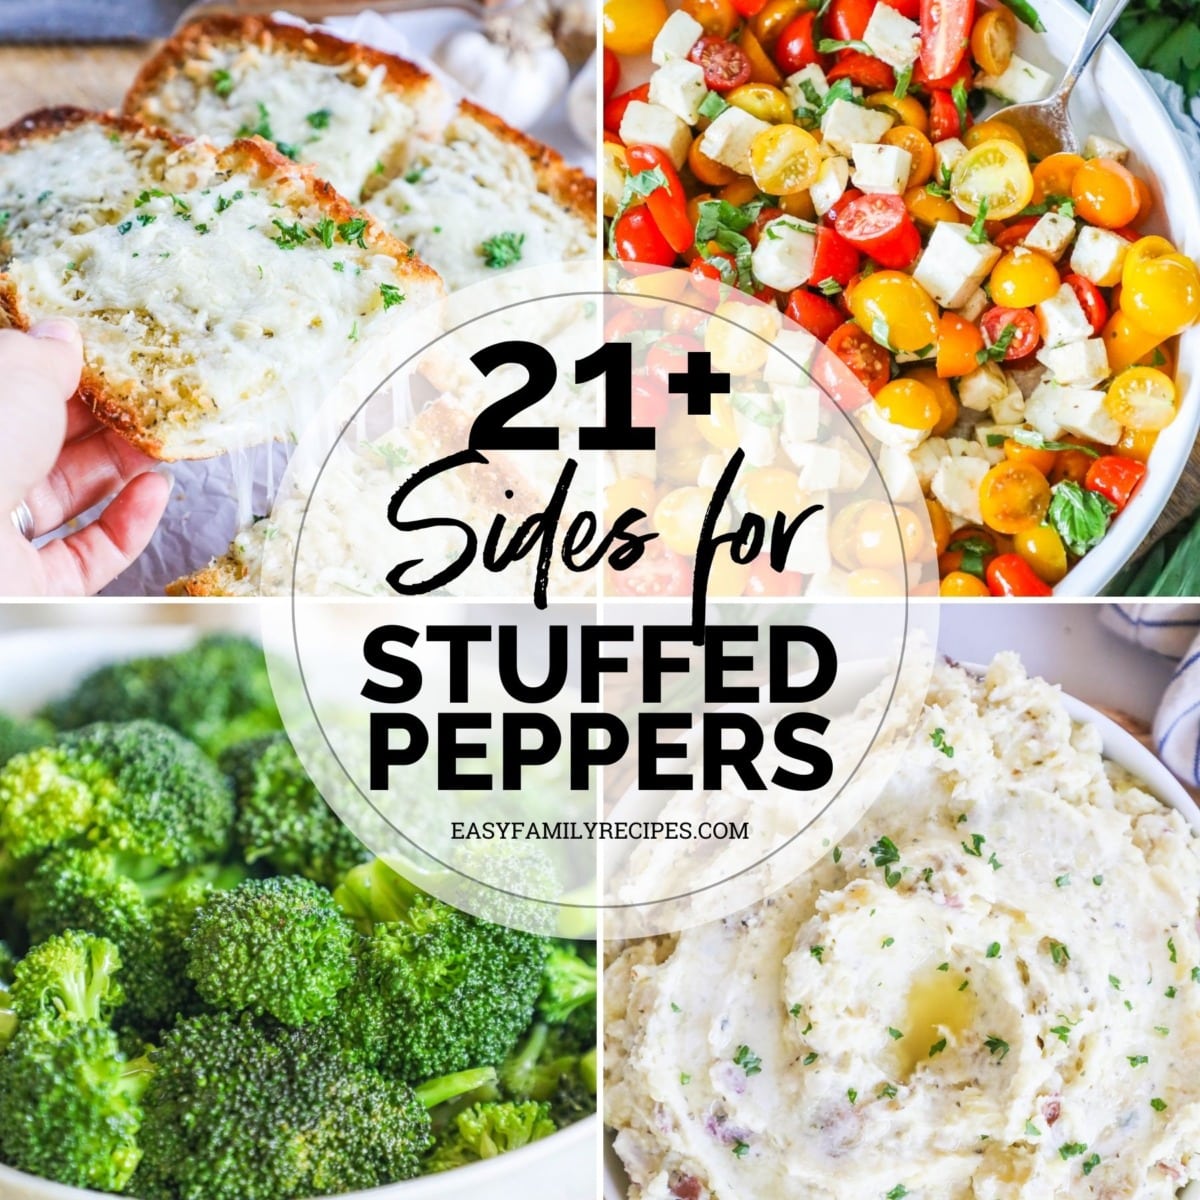 What to Serve with Stuffed Peppers: 21+ Best Side Dish Ideas!